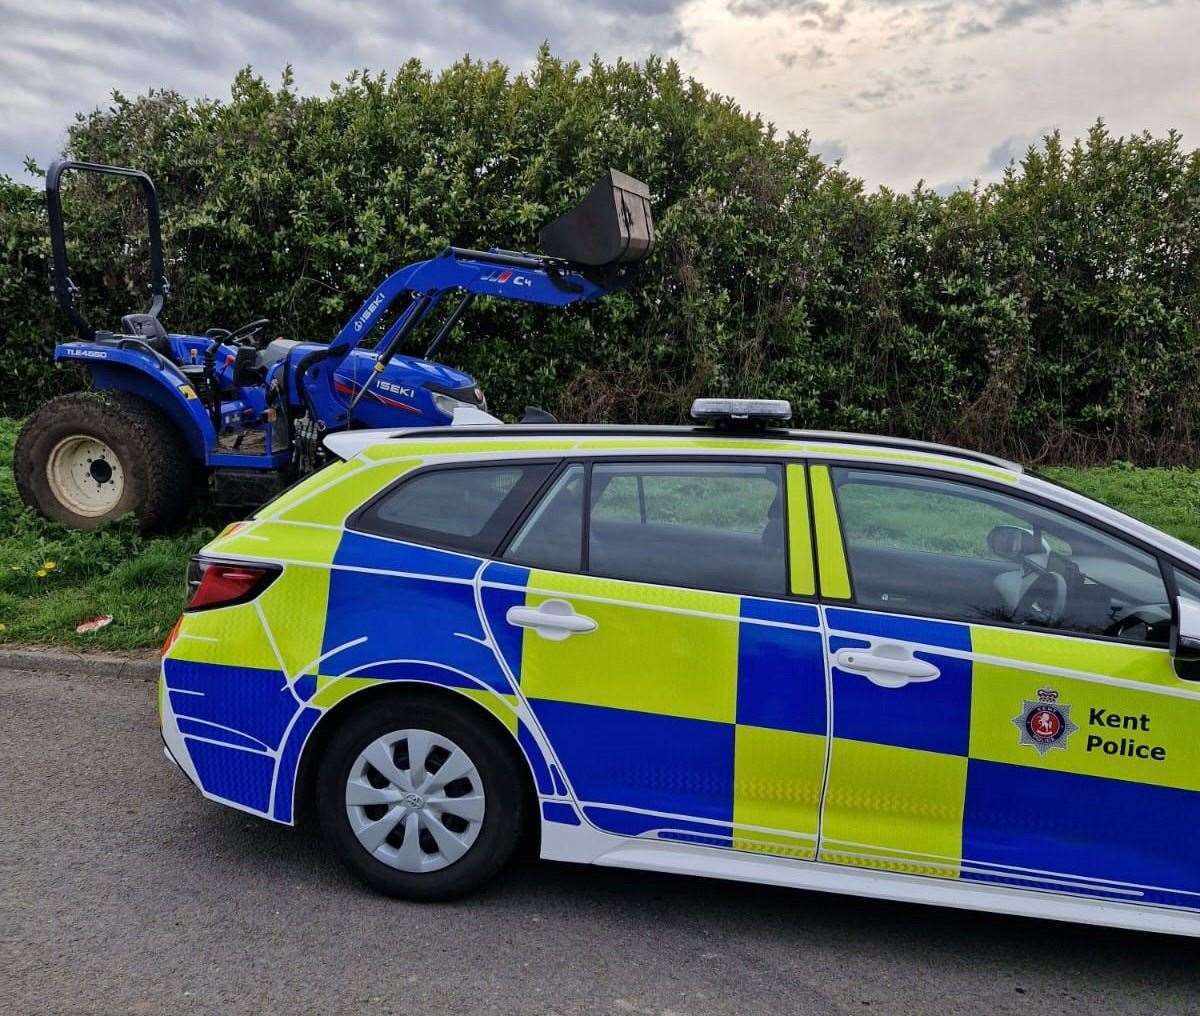 The tractor was found in a field by police. Picture: Kent Police